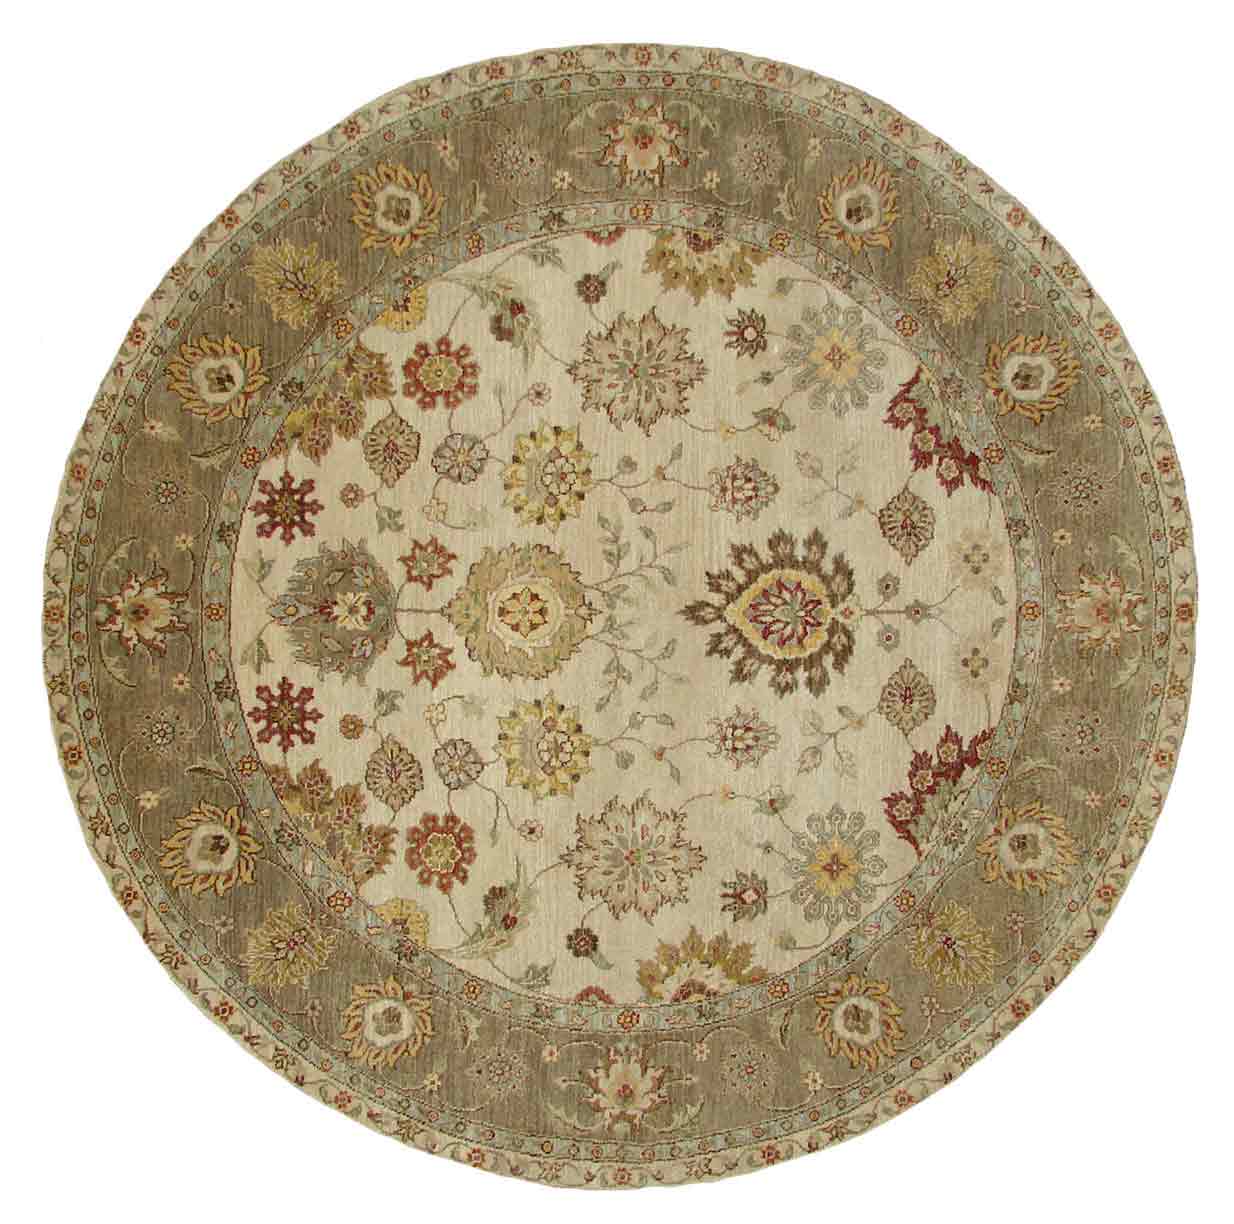 Round, Octagon & Square Rugs SULTAN 18472 Ivory - Beige & Lt. Brown - Chocolate Hand Knotted Rug